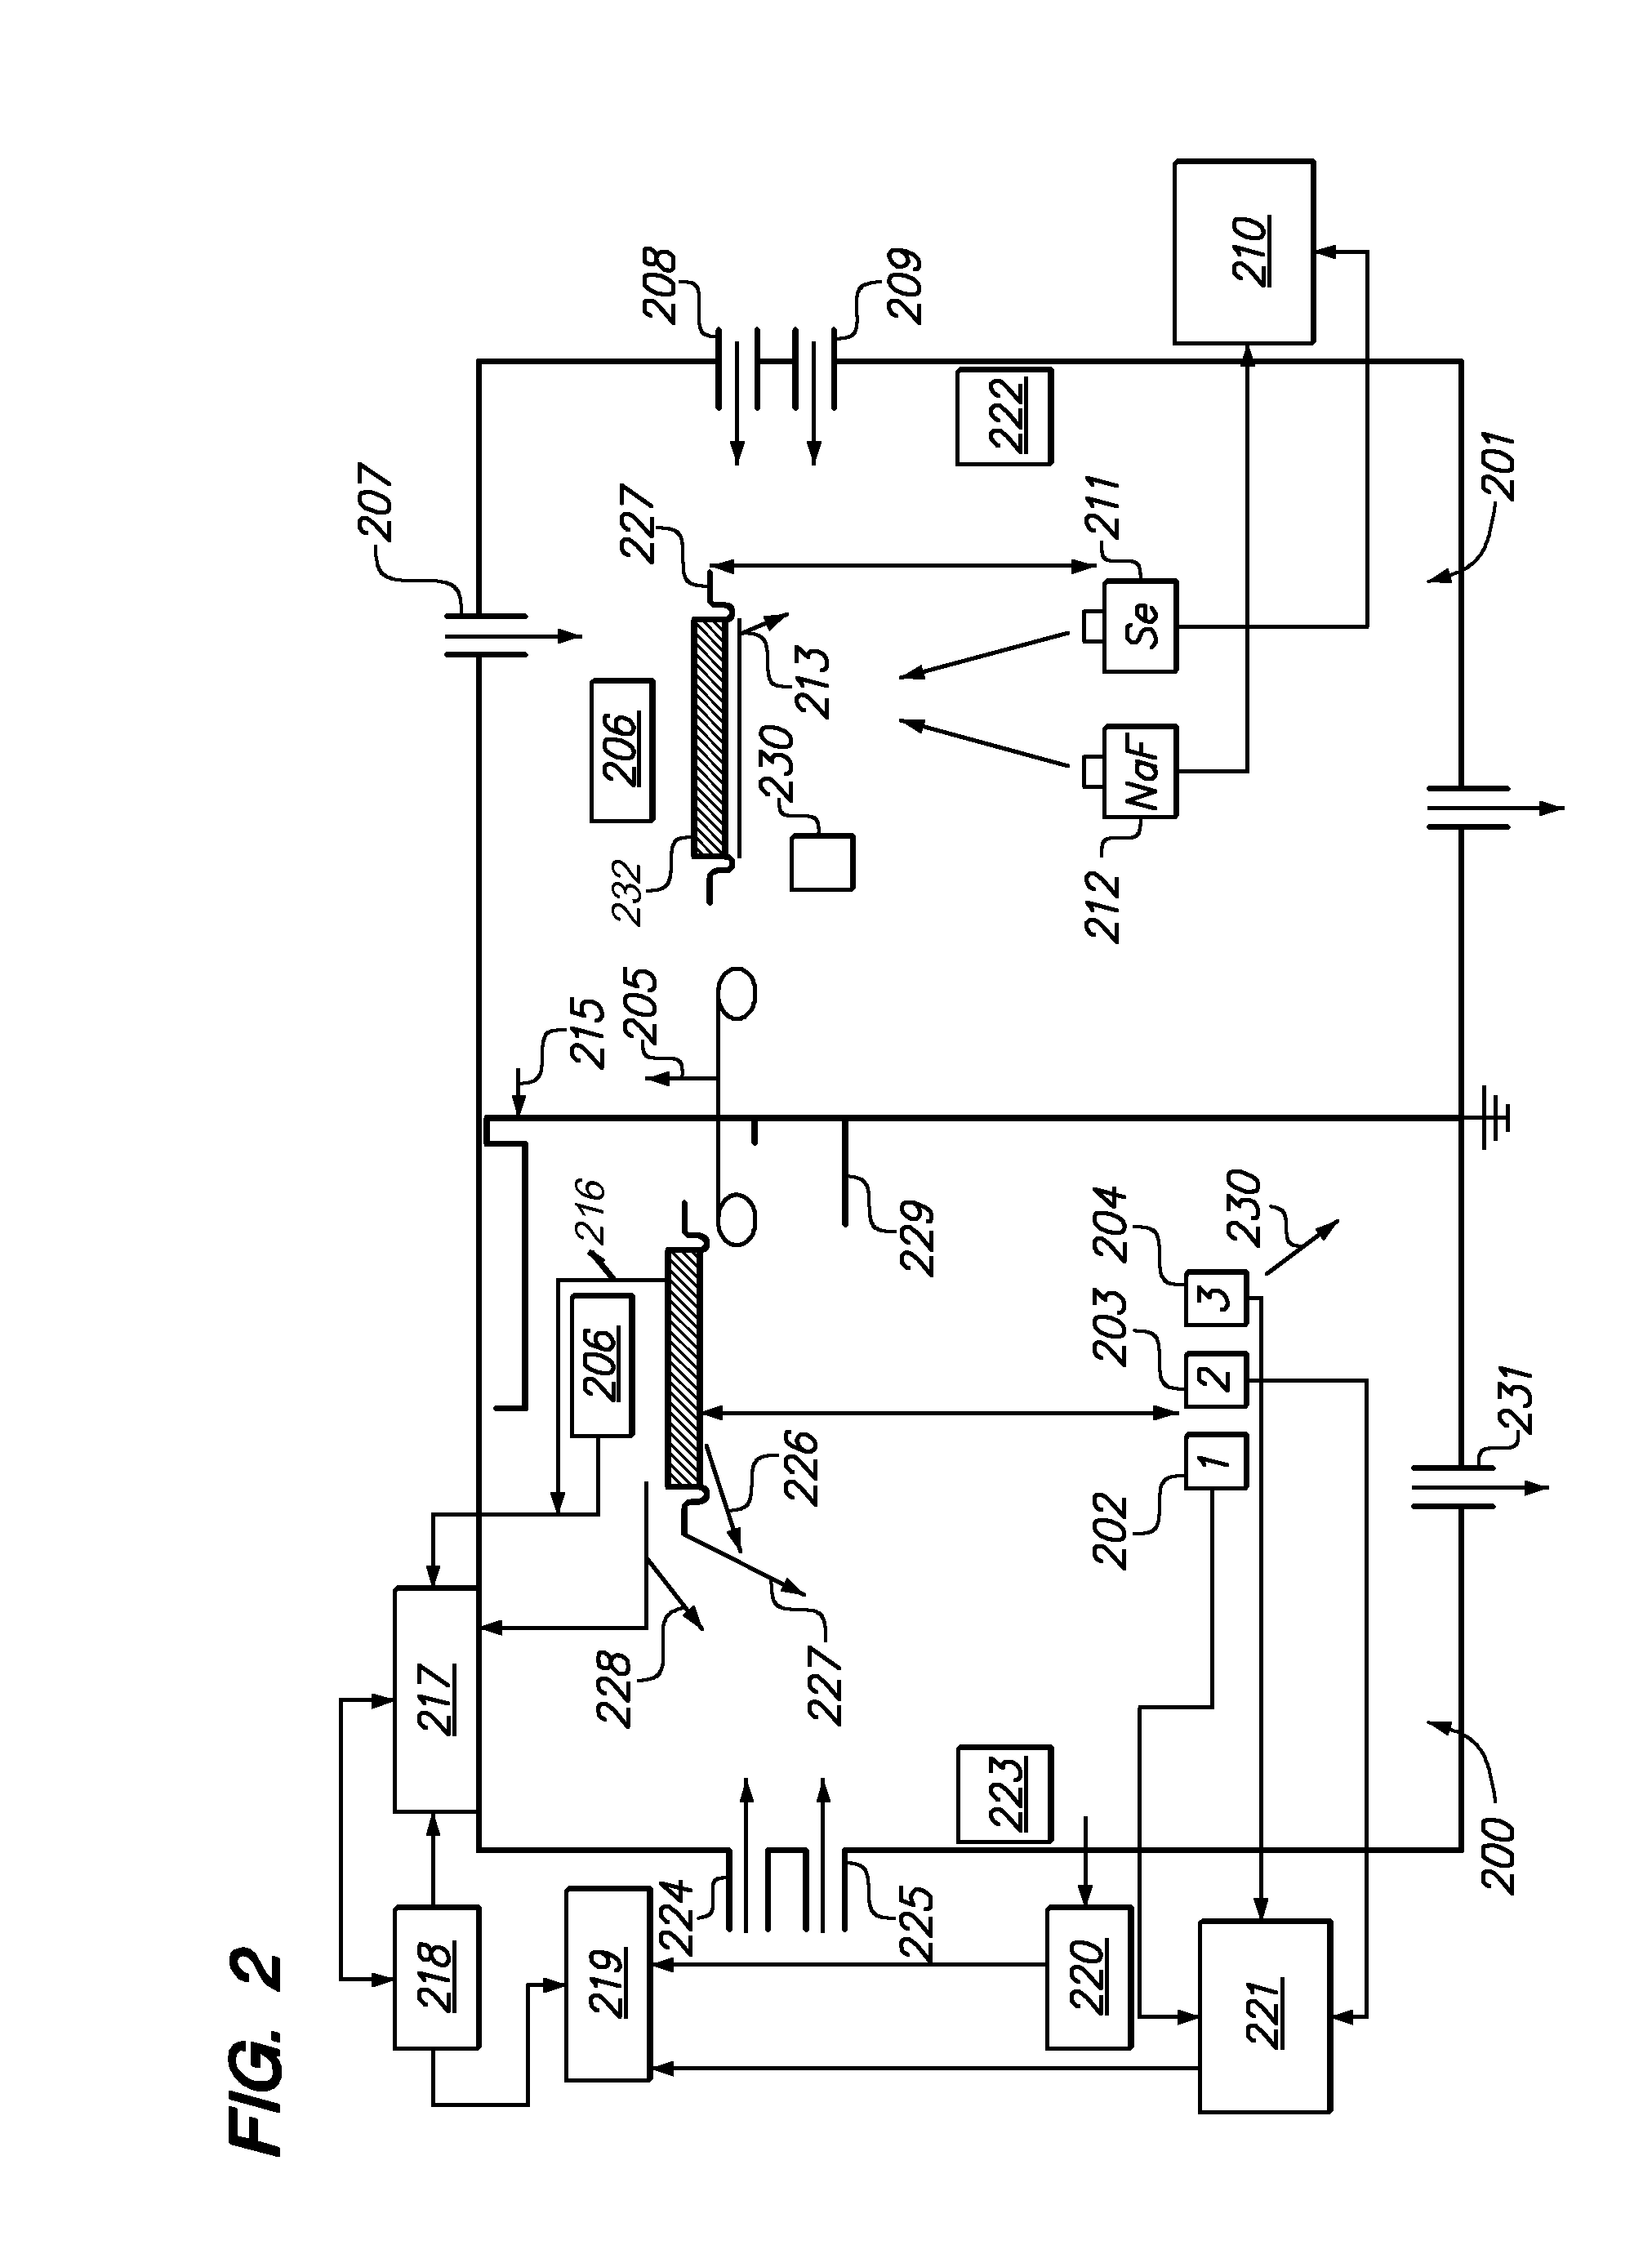 METHOD AND APPARATUS FOR DEPOSITING COPPER-INDIUM-GALLIUM SELENIDE (CuInGaSe2-CIGS) THIN FILMS AND OTHER MATERIALS ON A SUBSTRATE